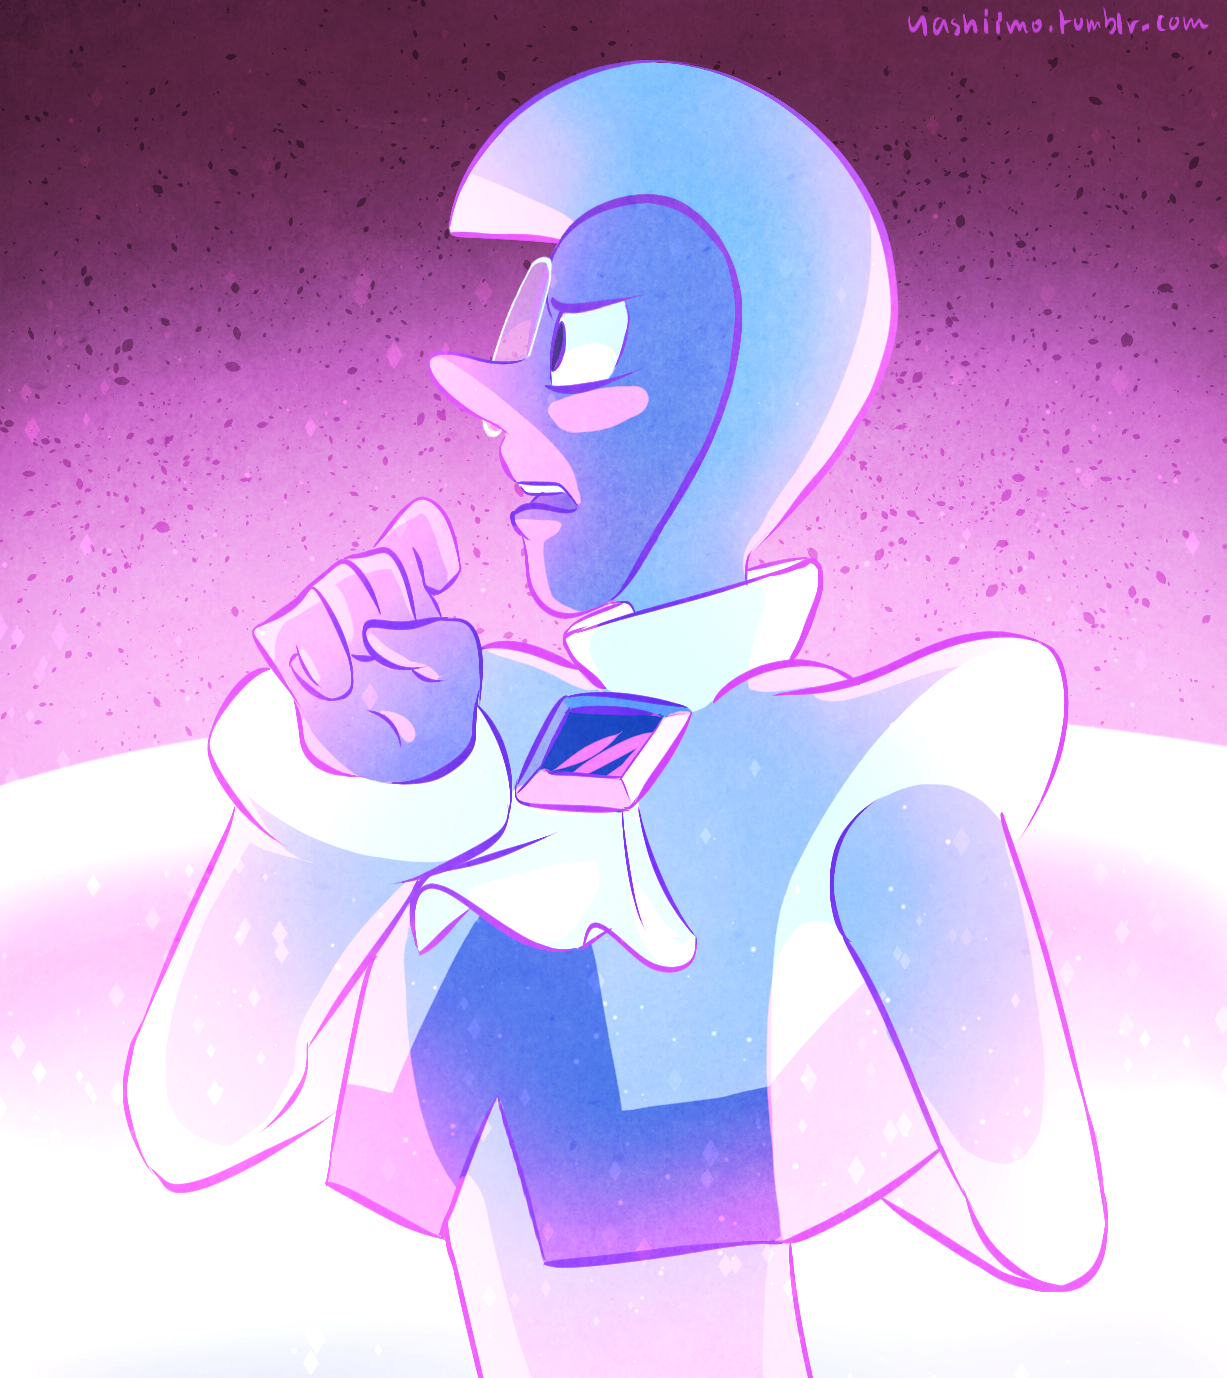 yashiimo: “Where were Pink Diamond’s attendants? Her agates? Her sapphires? And